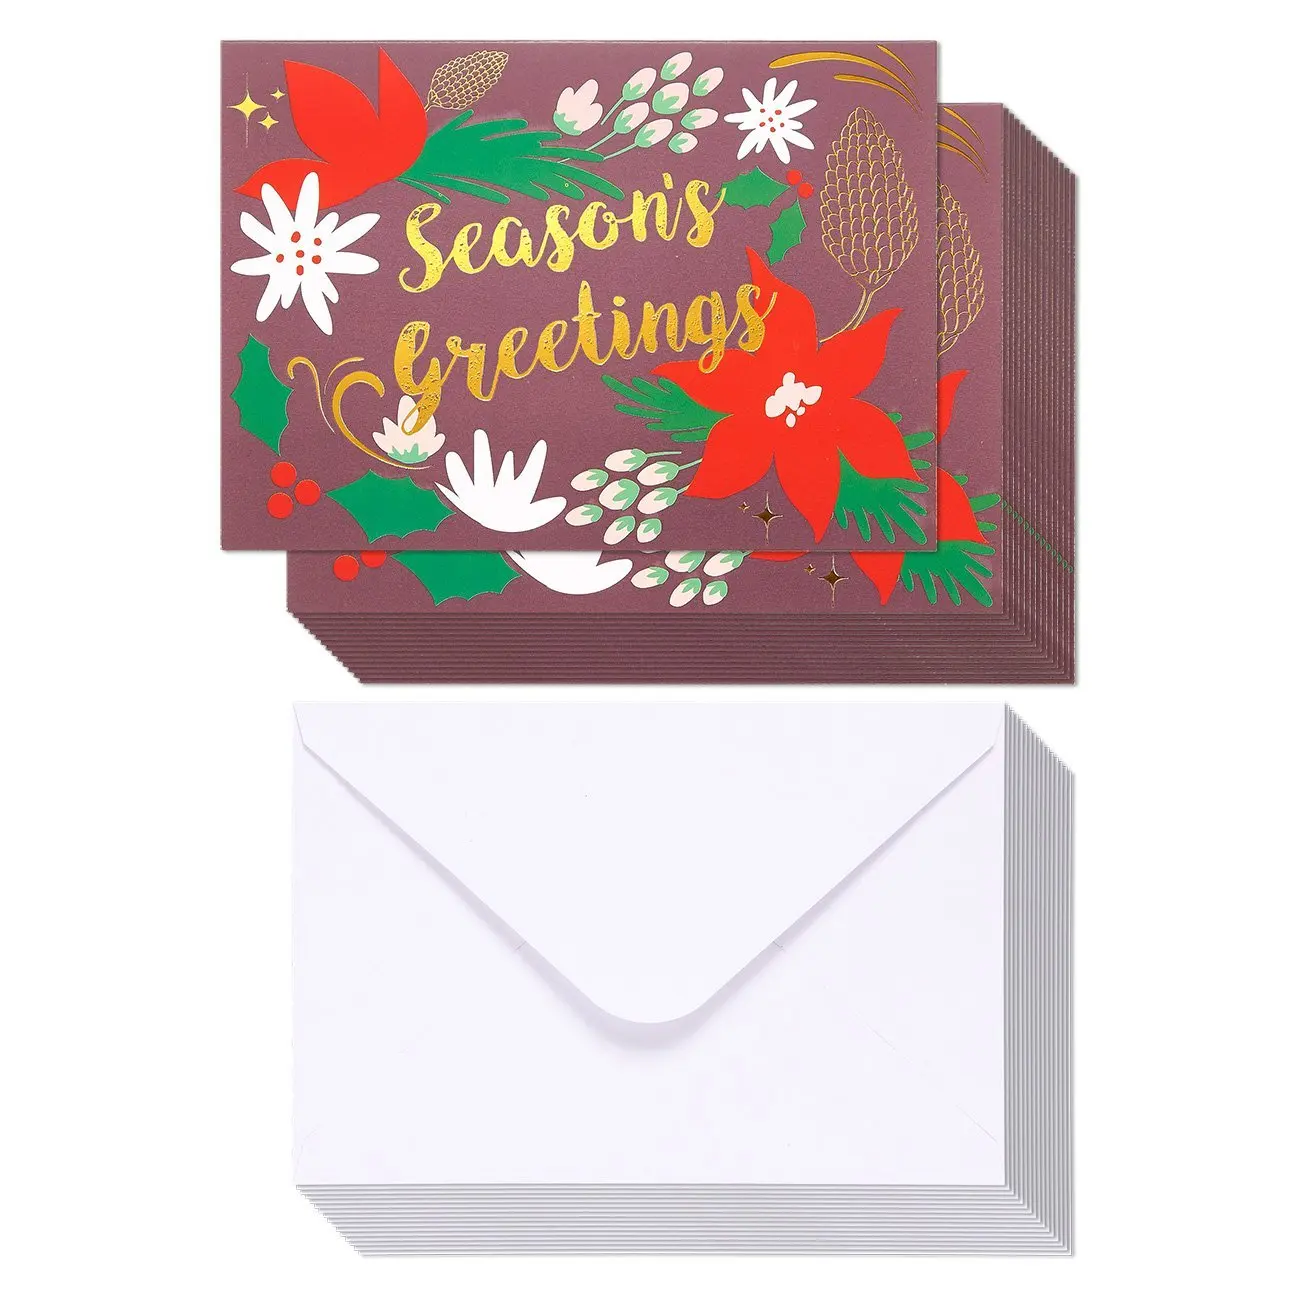 Buy 48 Pack Merry Christmas Greeting Cards Bulk Box Set Winter Holiday Xmas Greeting Cards In Fancy Design With Gold Foil Accents Envelopes Included 4 X 6 Inches In Cheap Price On Alibaba Com